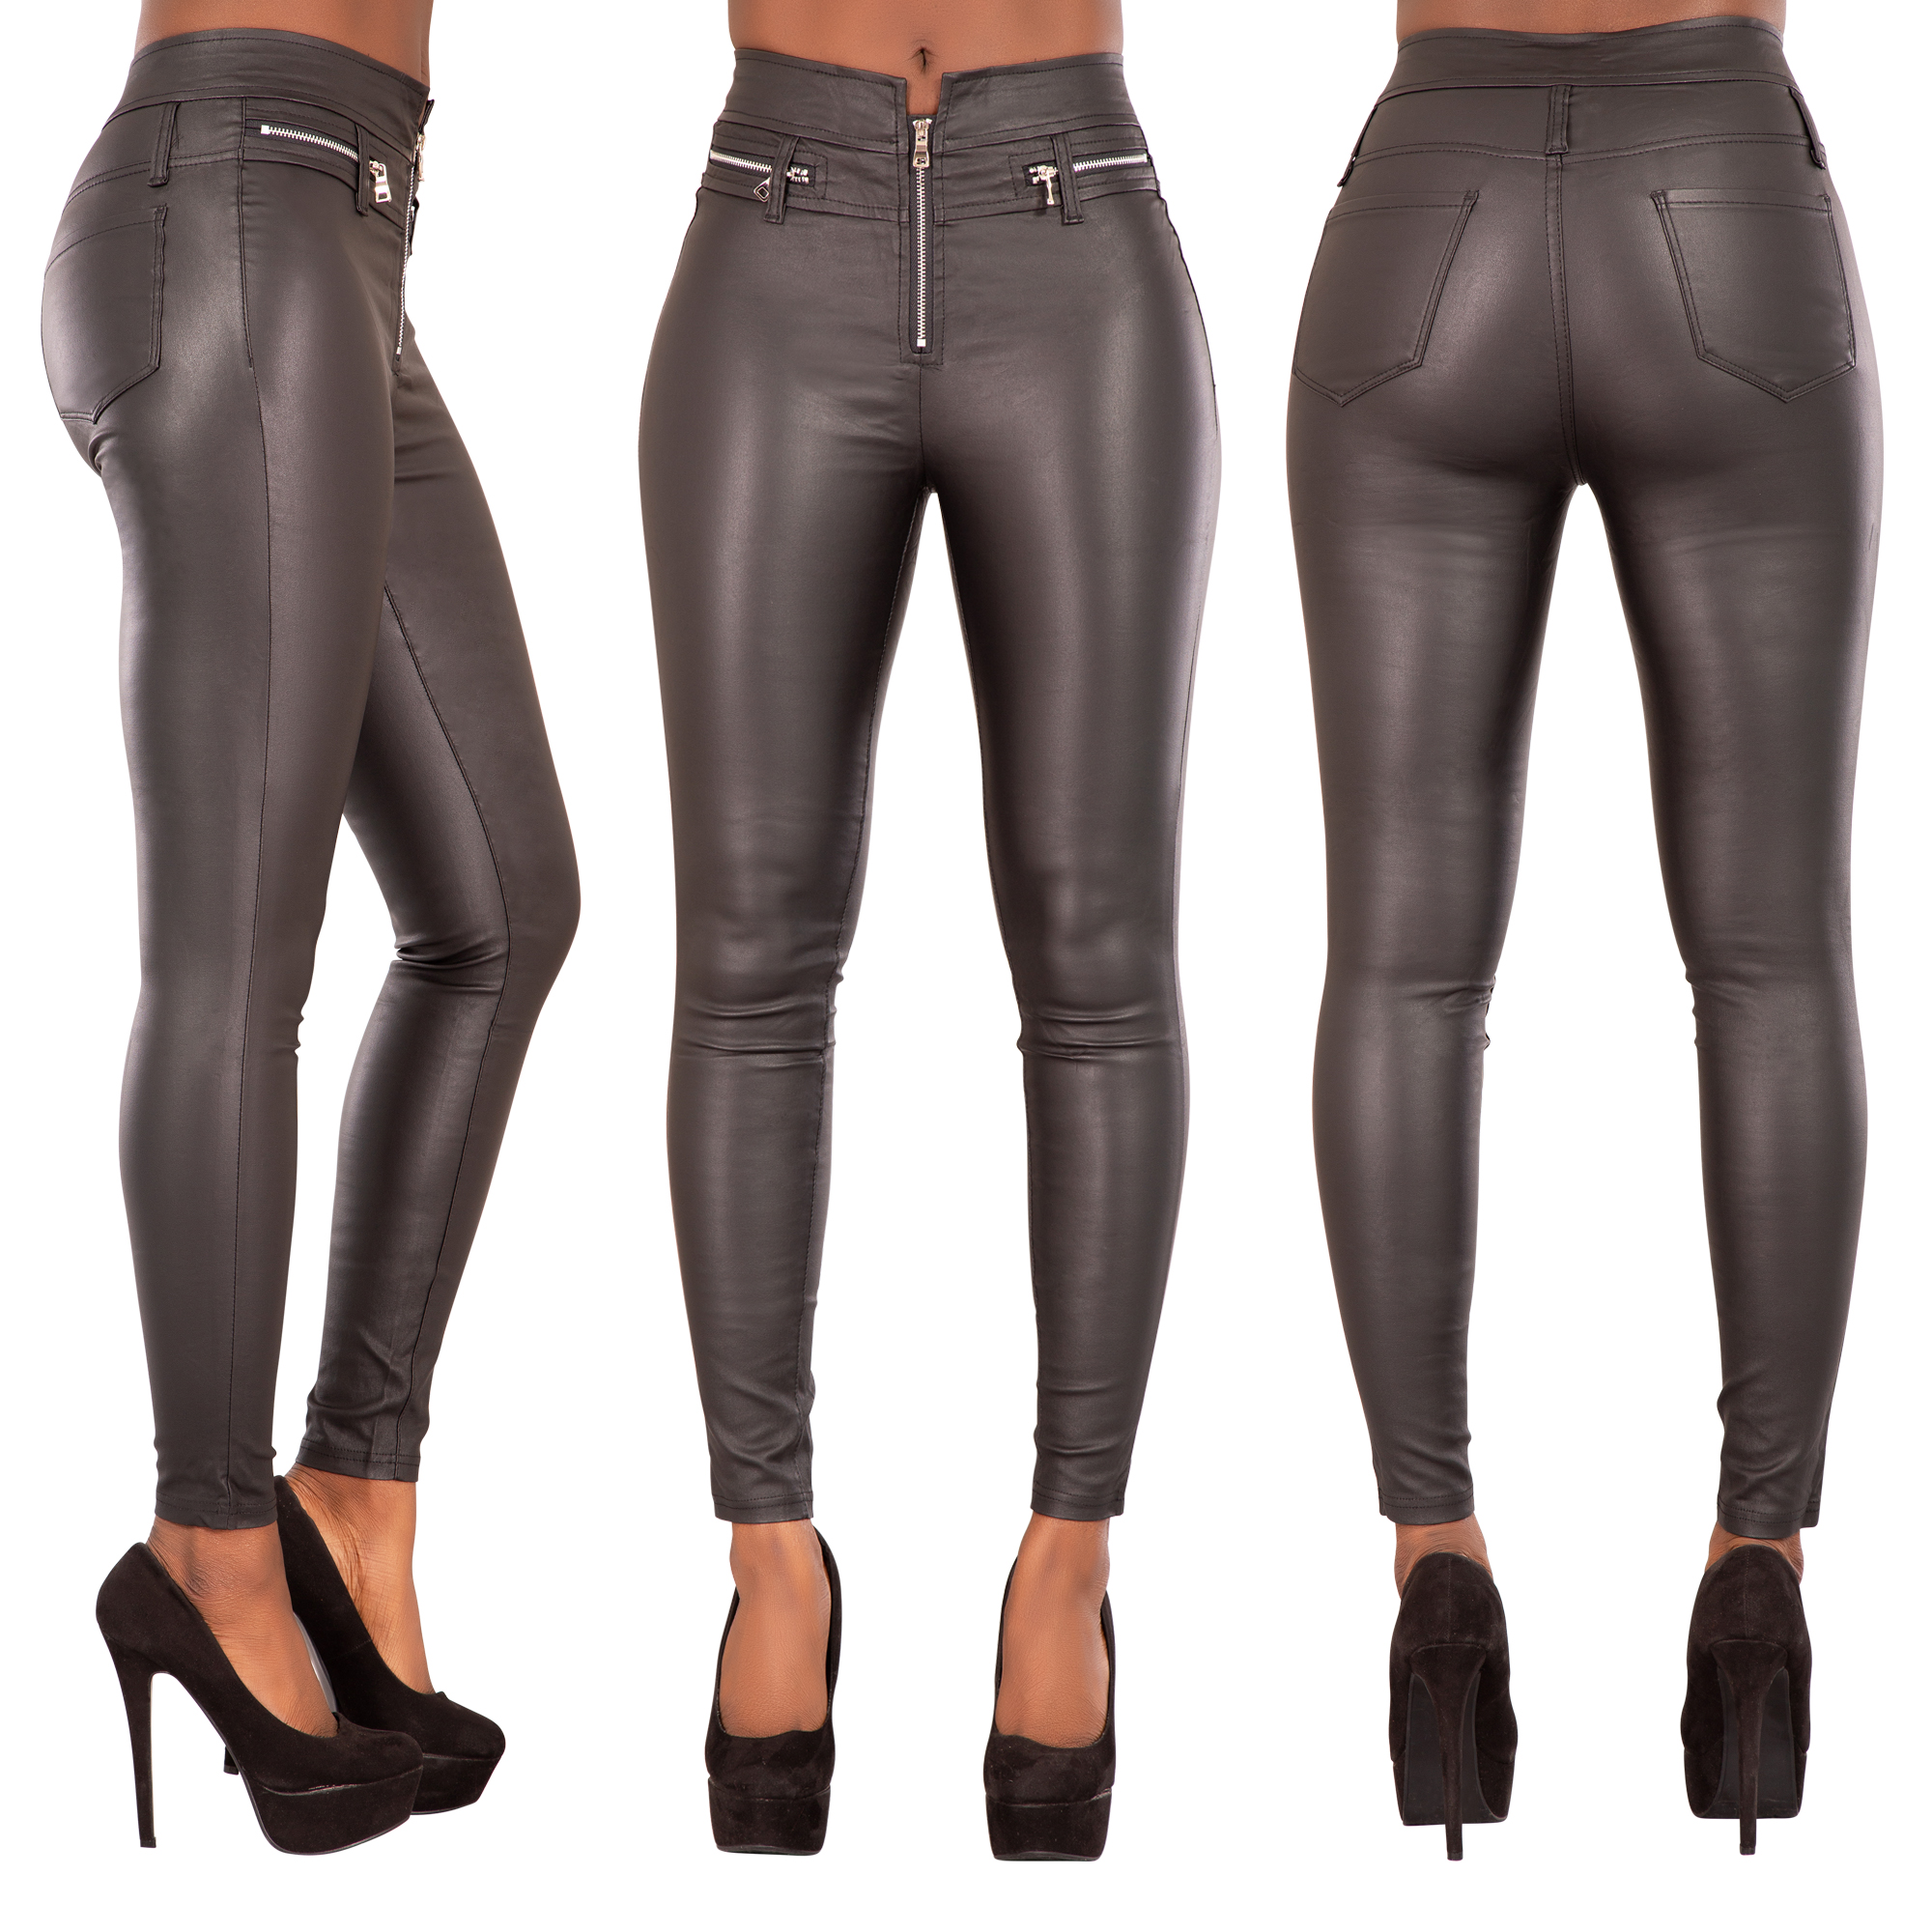 New Look shoppers rush to buy 'great quality' £10 leather leggings